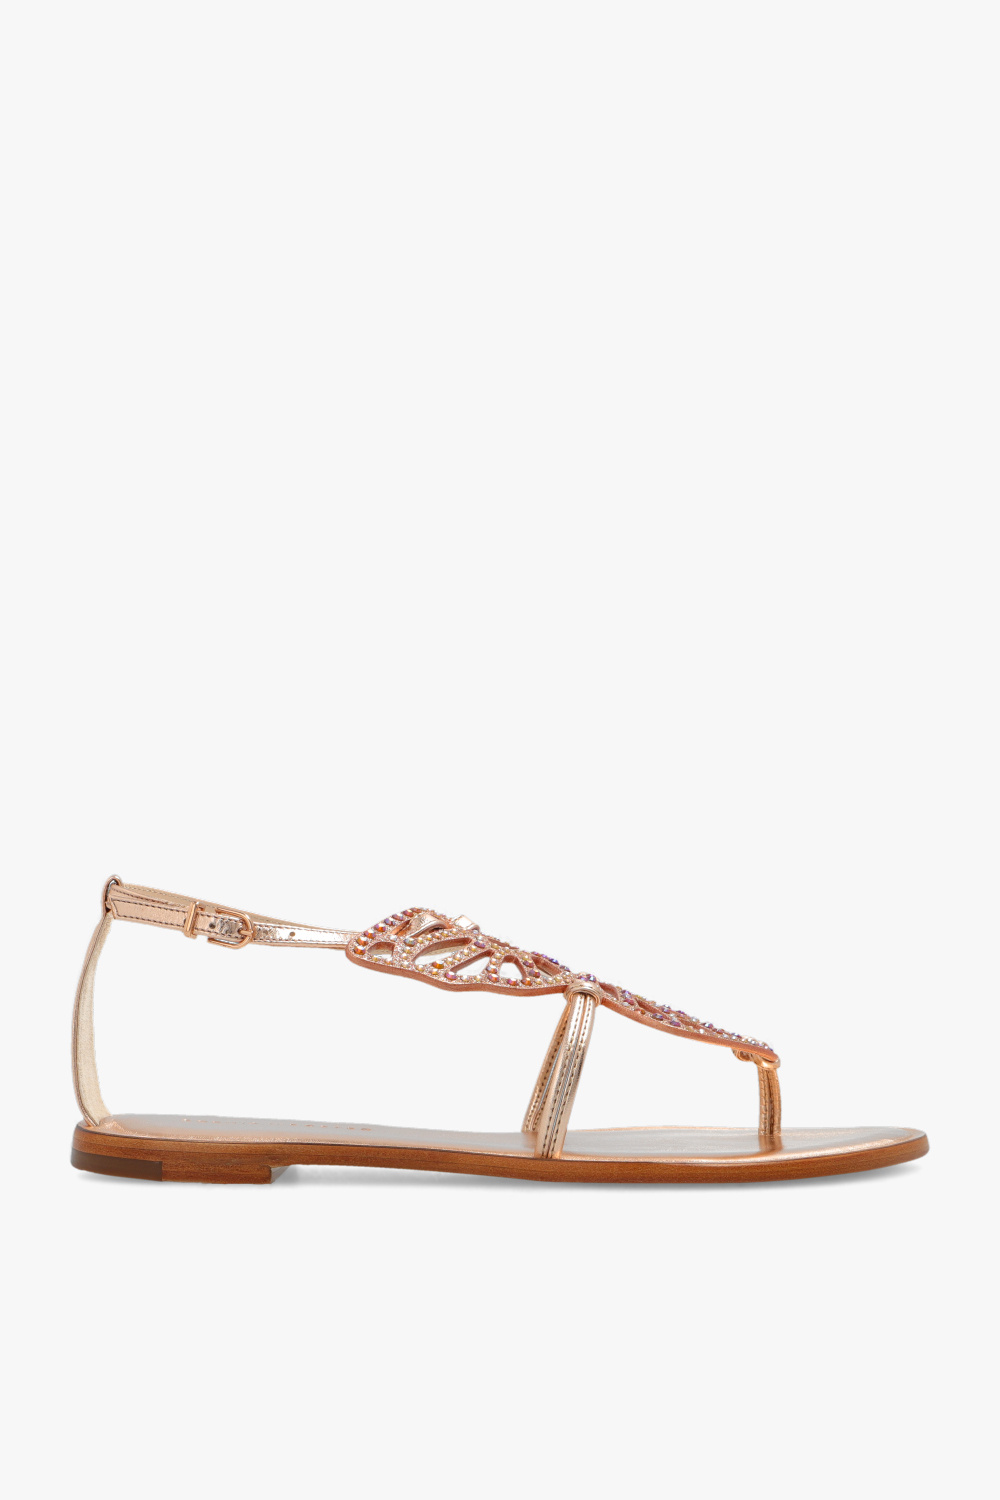 Sophia Webster ‘Butterfly’ heeled curry sandals